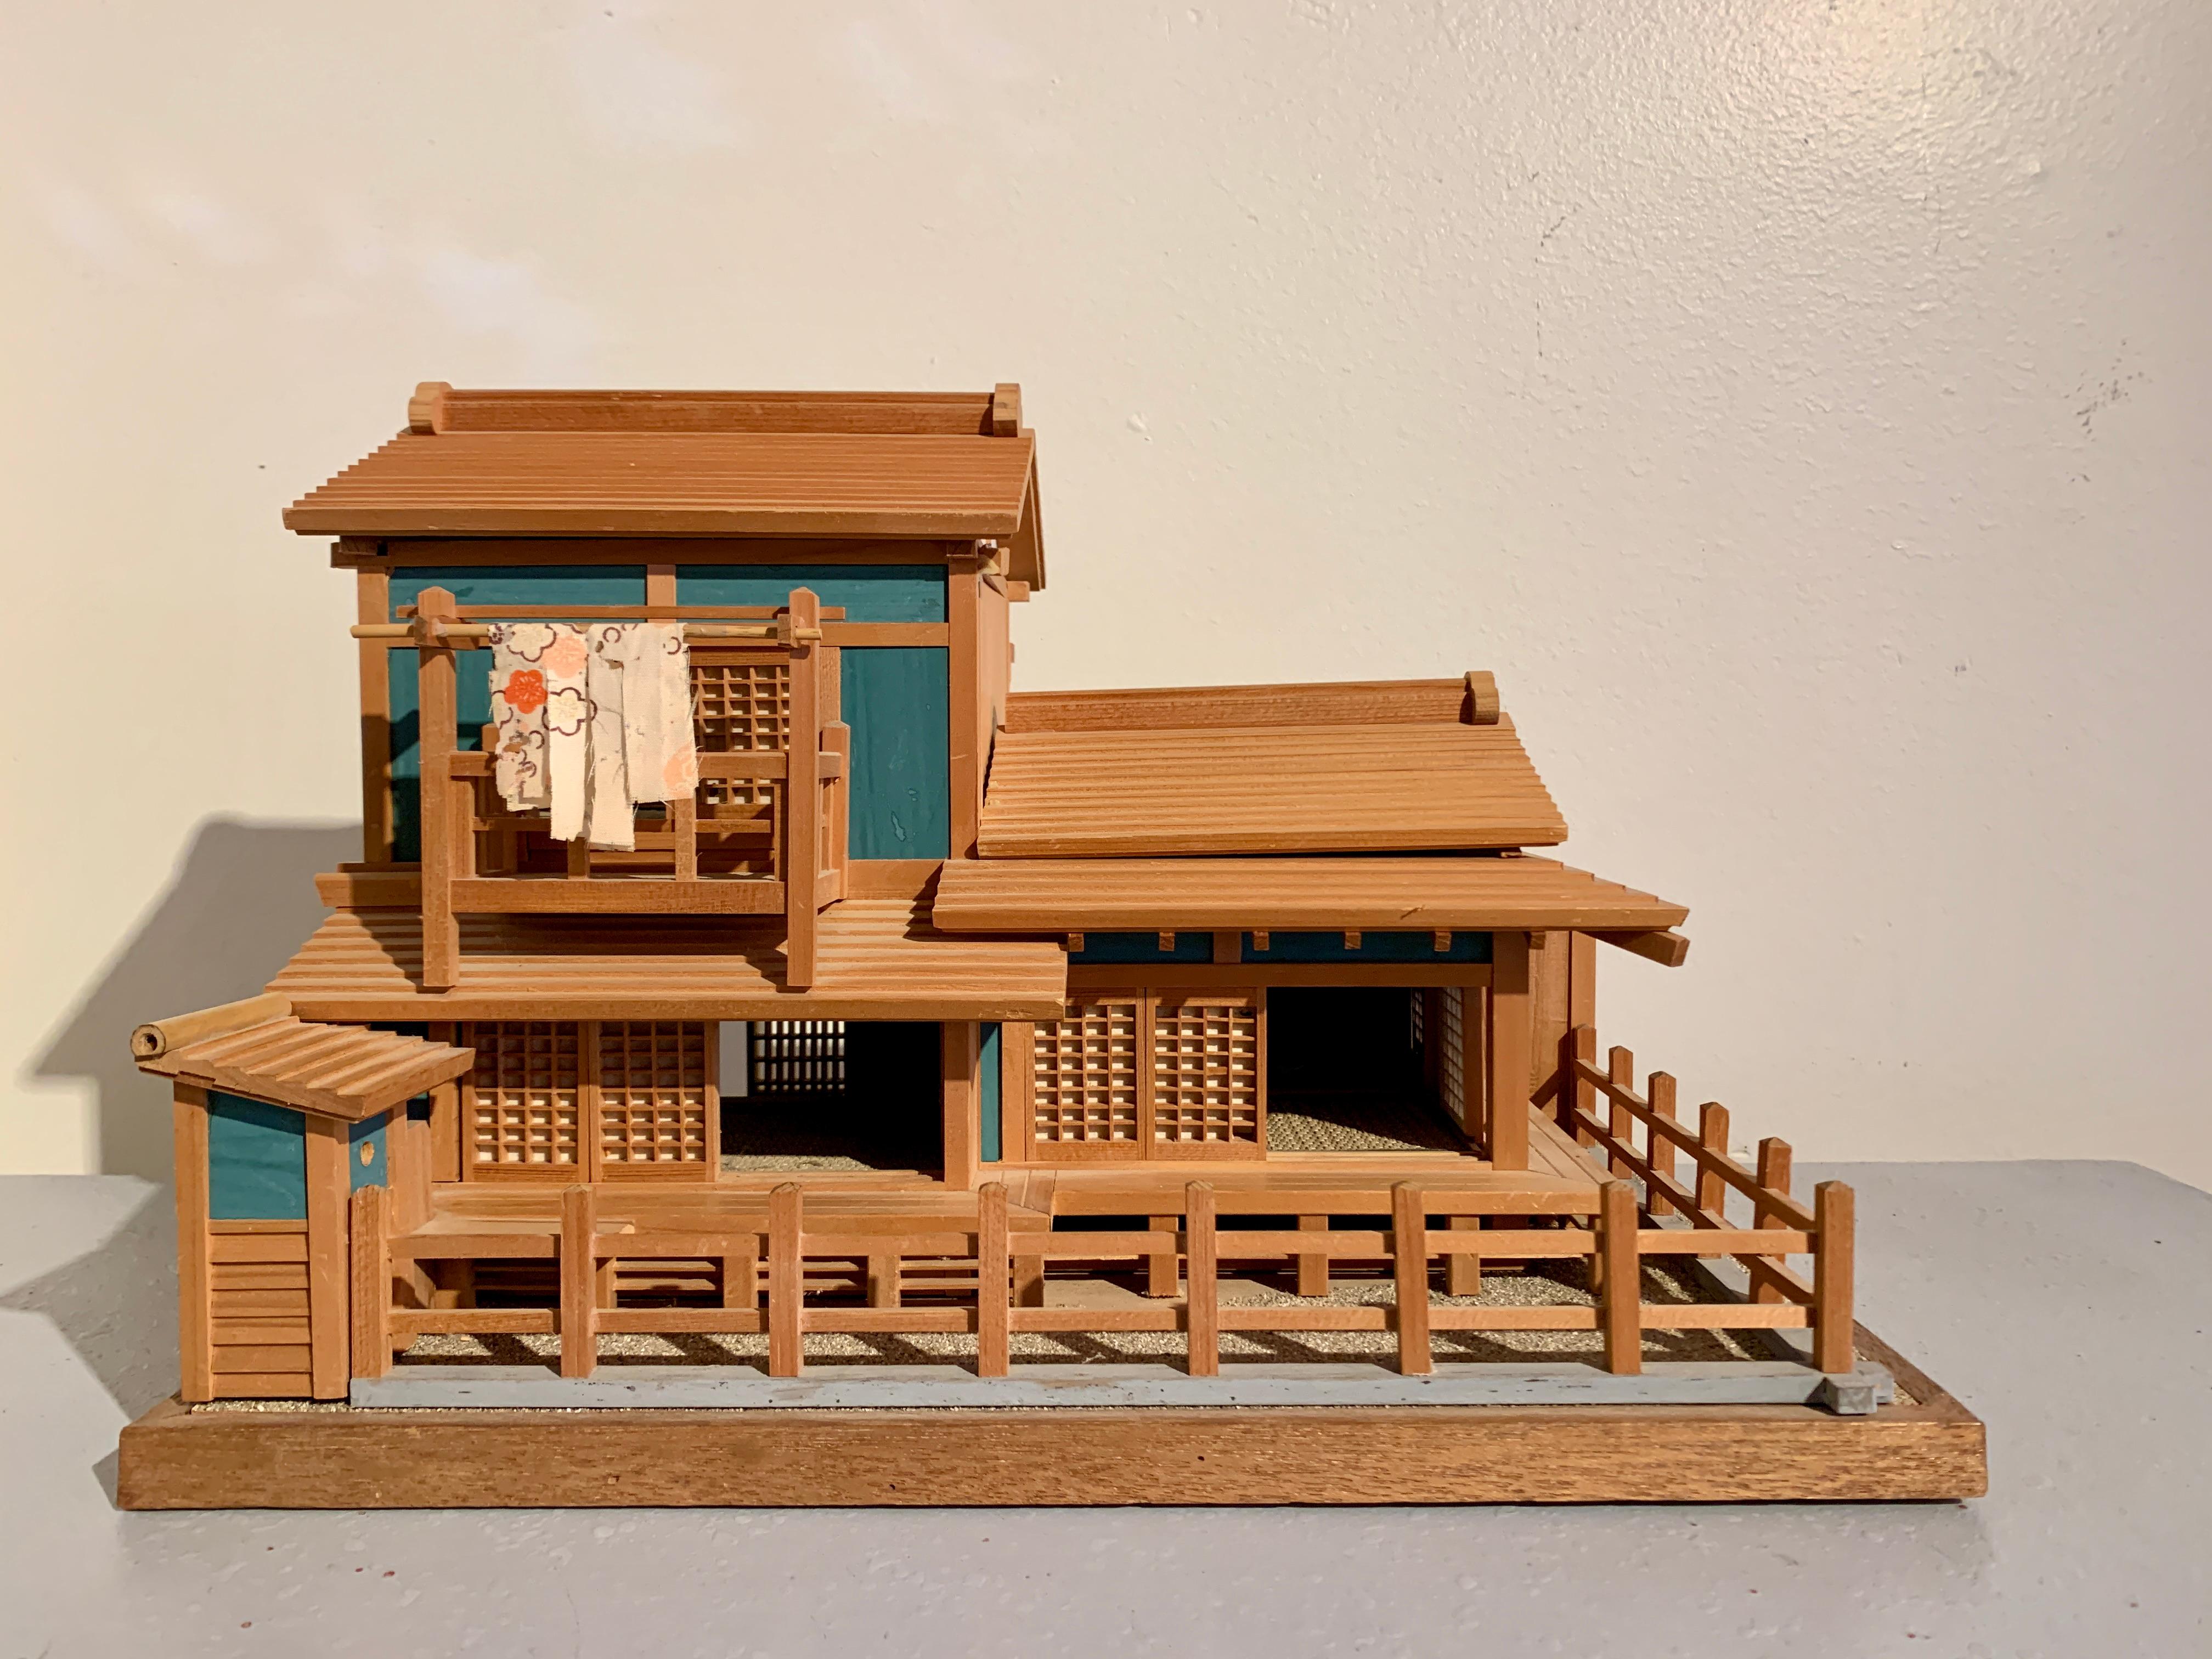 Showa Vintage Japanese Architectural Model of a Traditional House, Mid 20th Century